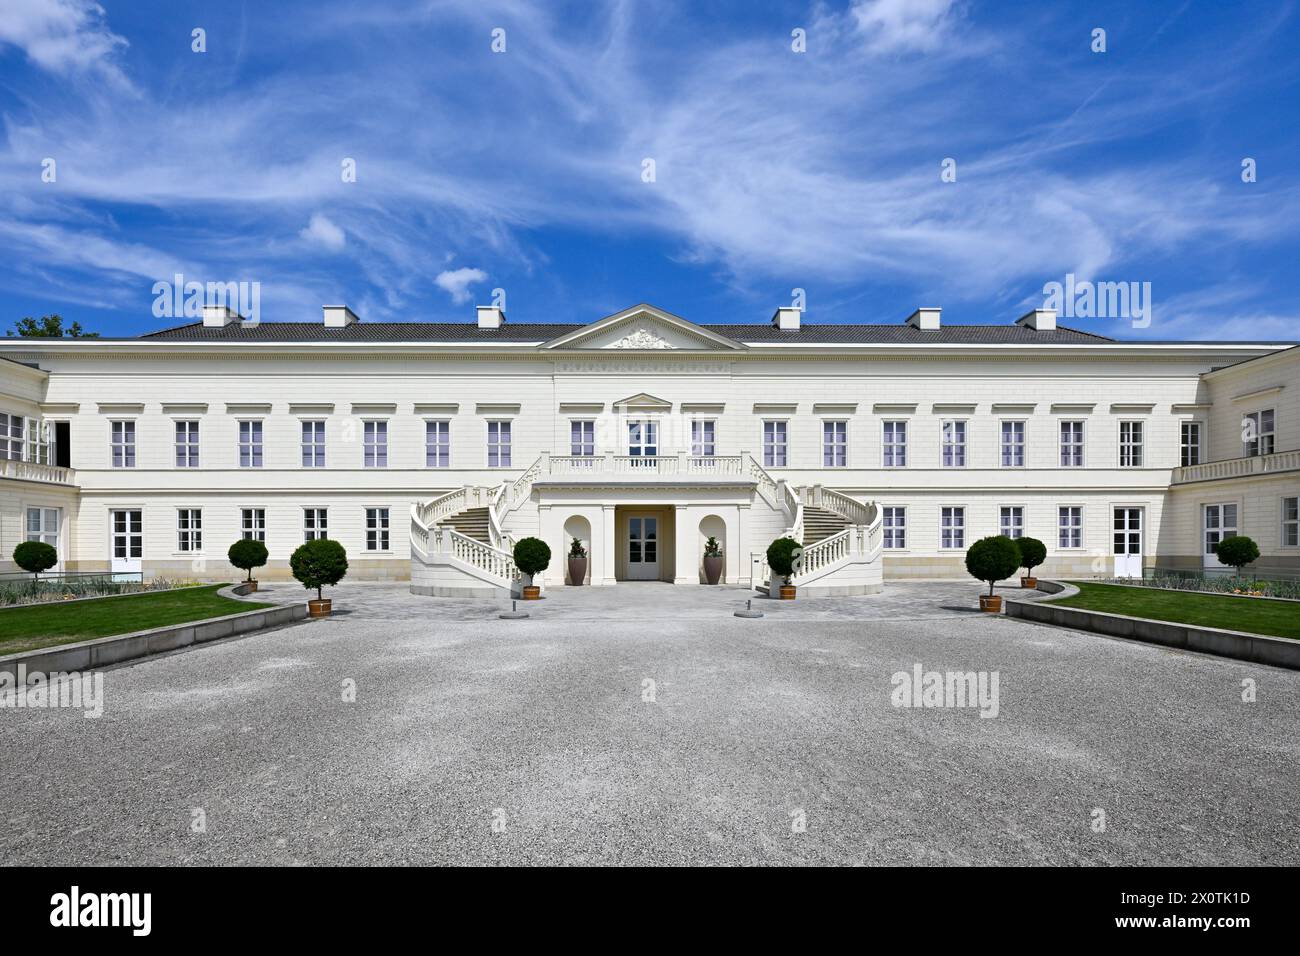 Castle of Herrenhausen Palace located in Hanover, Germany Stock Photo